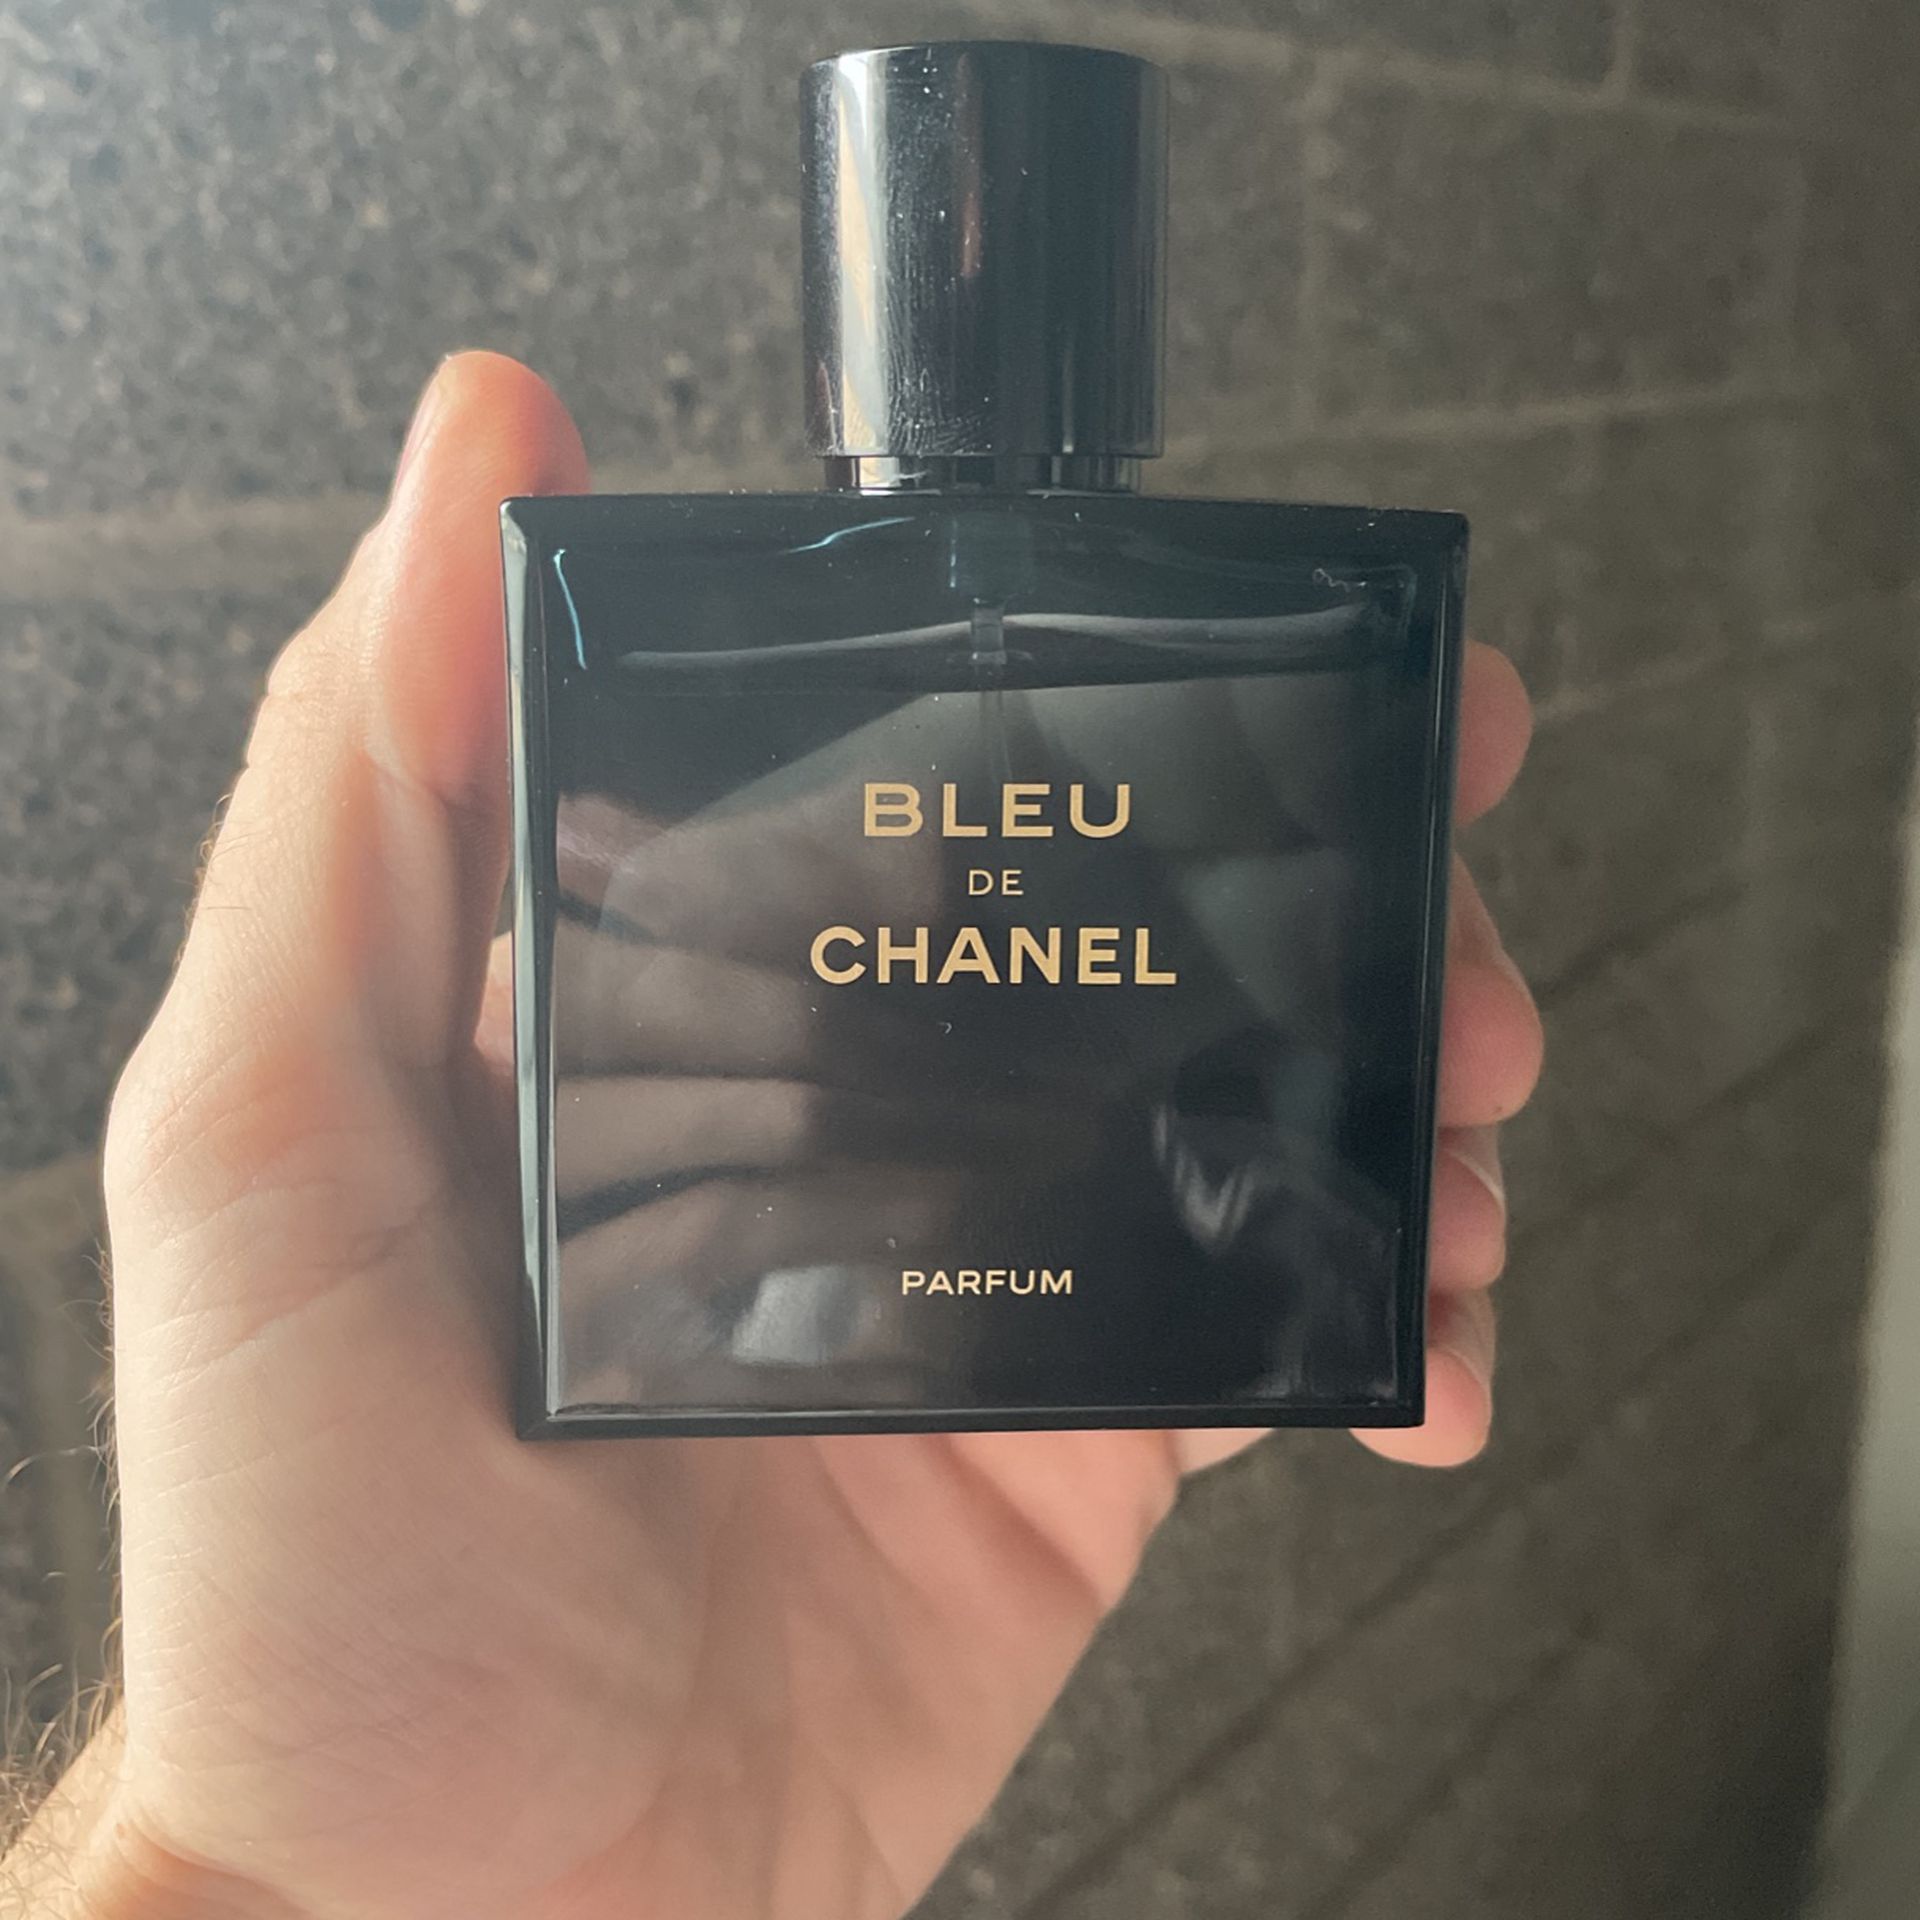 BLEU DE CHANEL PARIS 50 Ml 1.7FLOZ Made in France for your boy it reminds  me for Sale in Seattle, WA - OfferUp